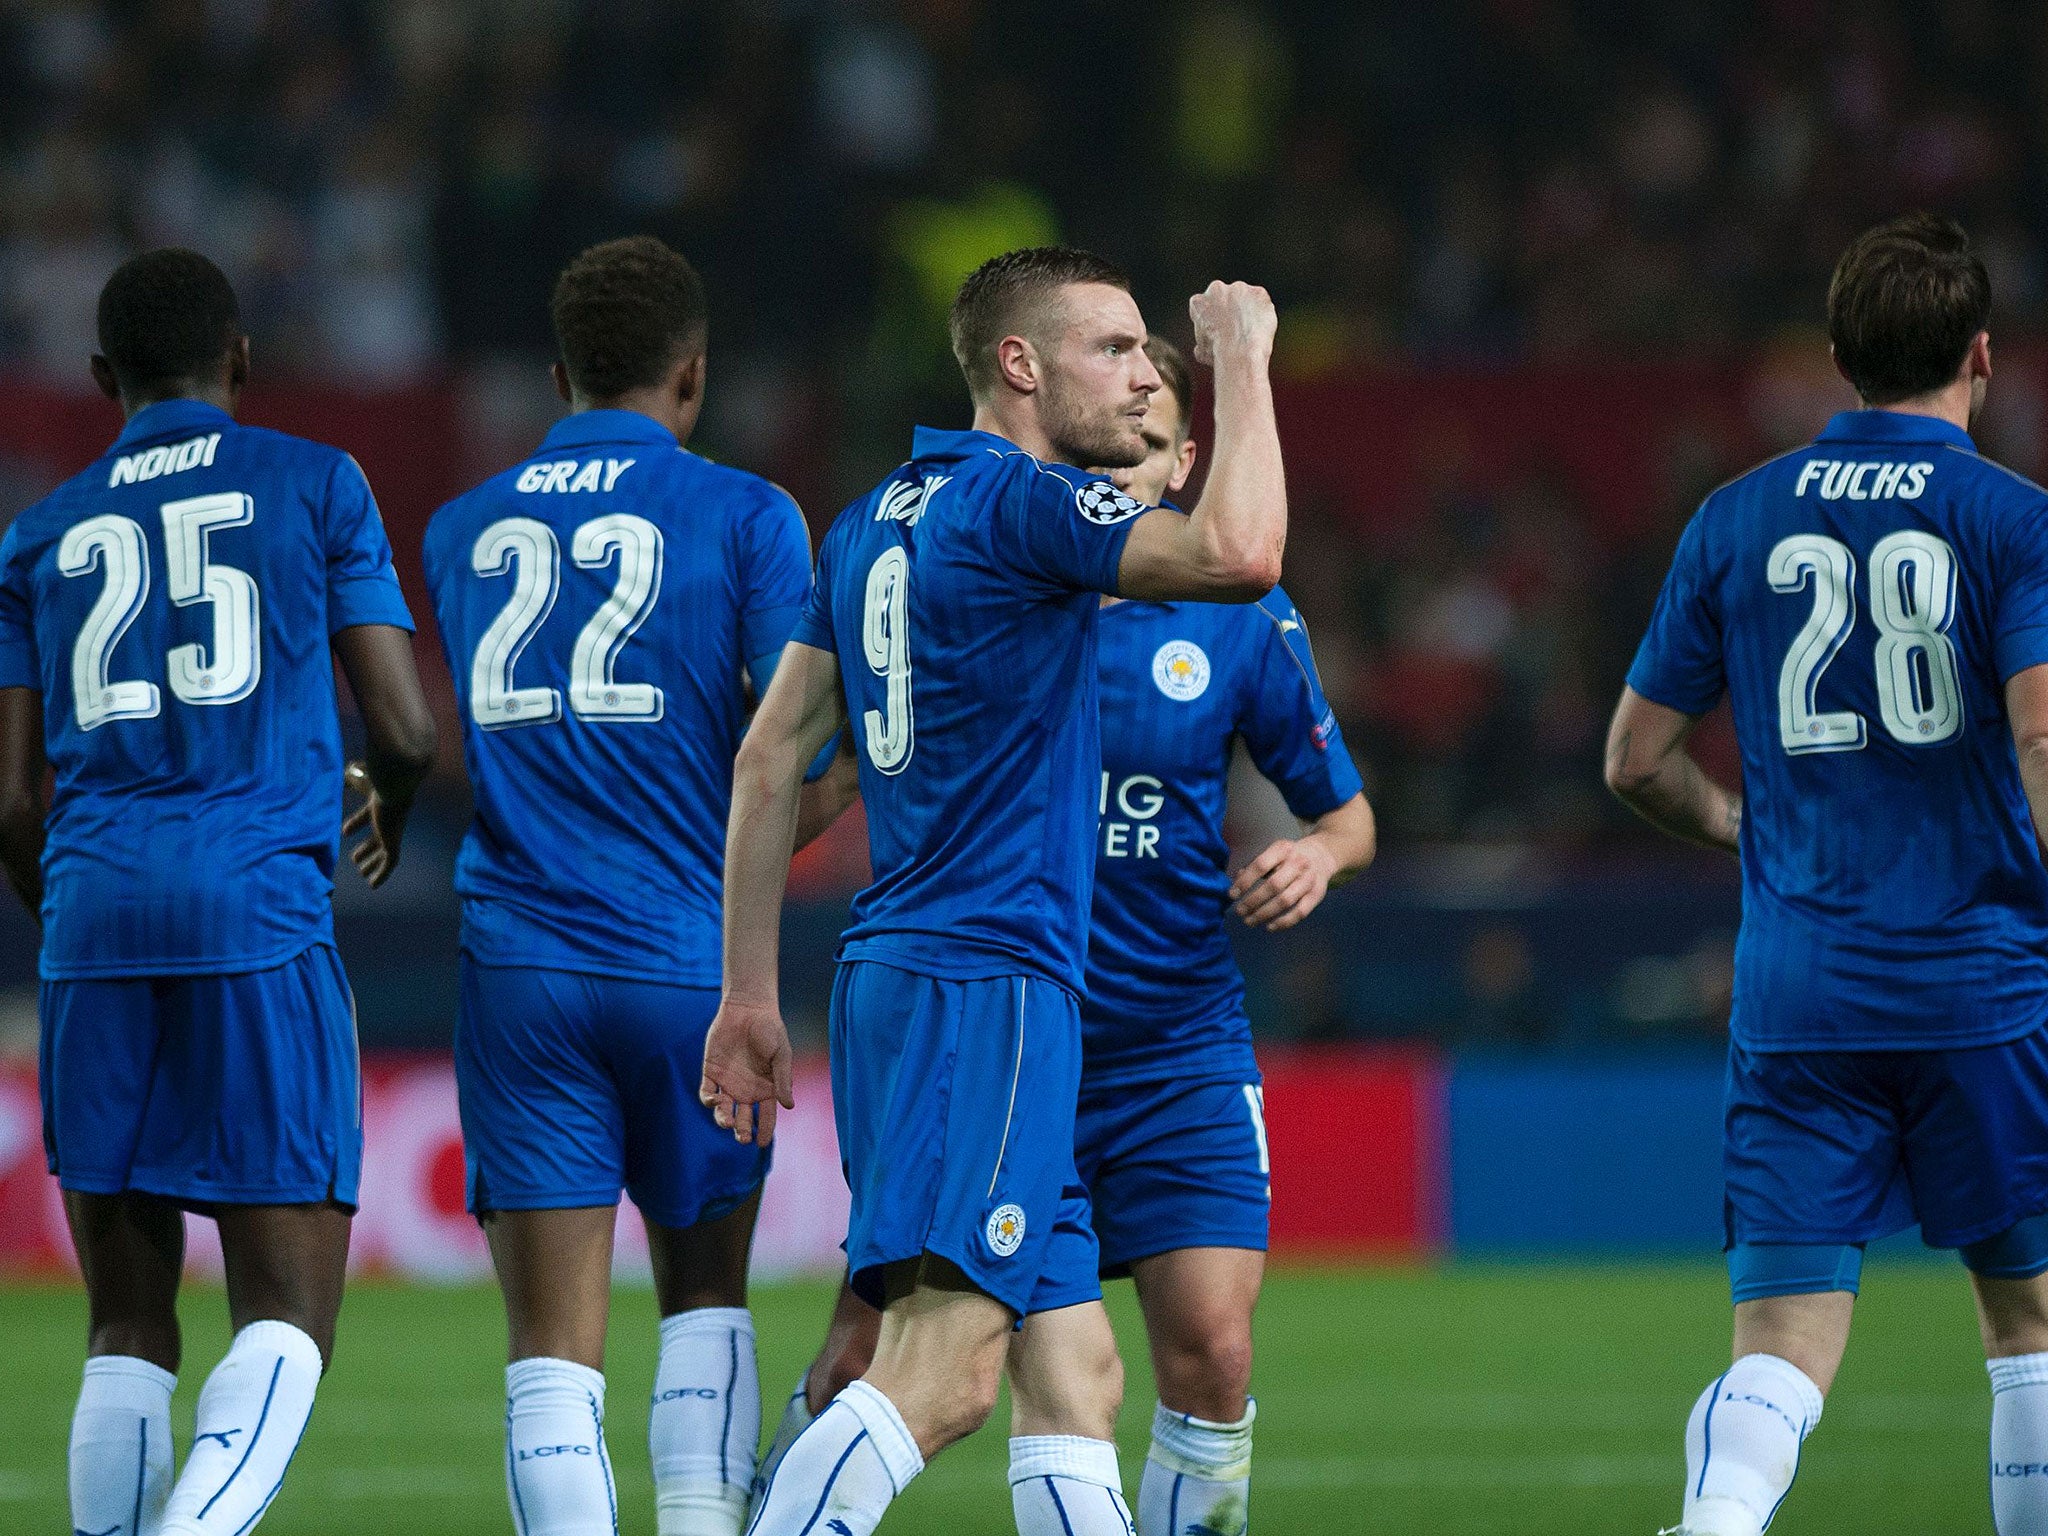 Vardy celebrates after scoring an important away goal for the Premier League champions